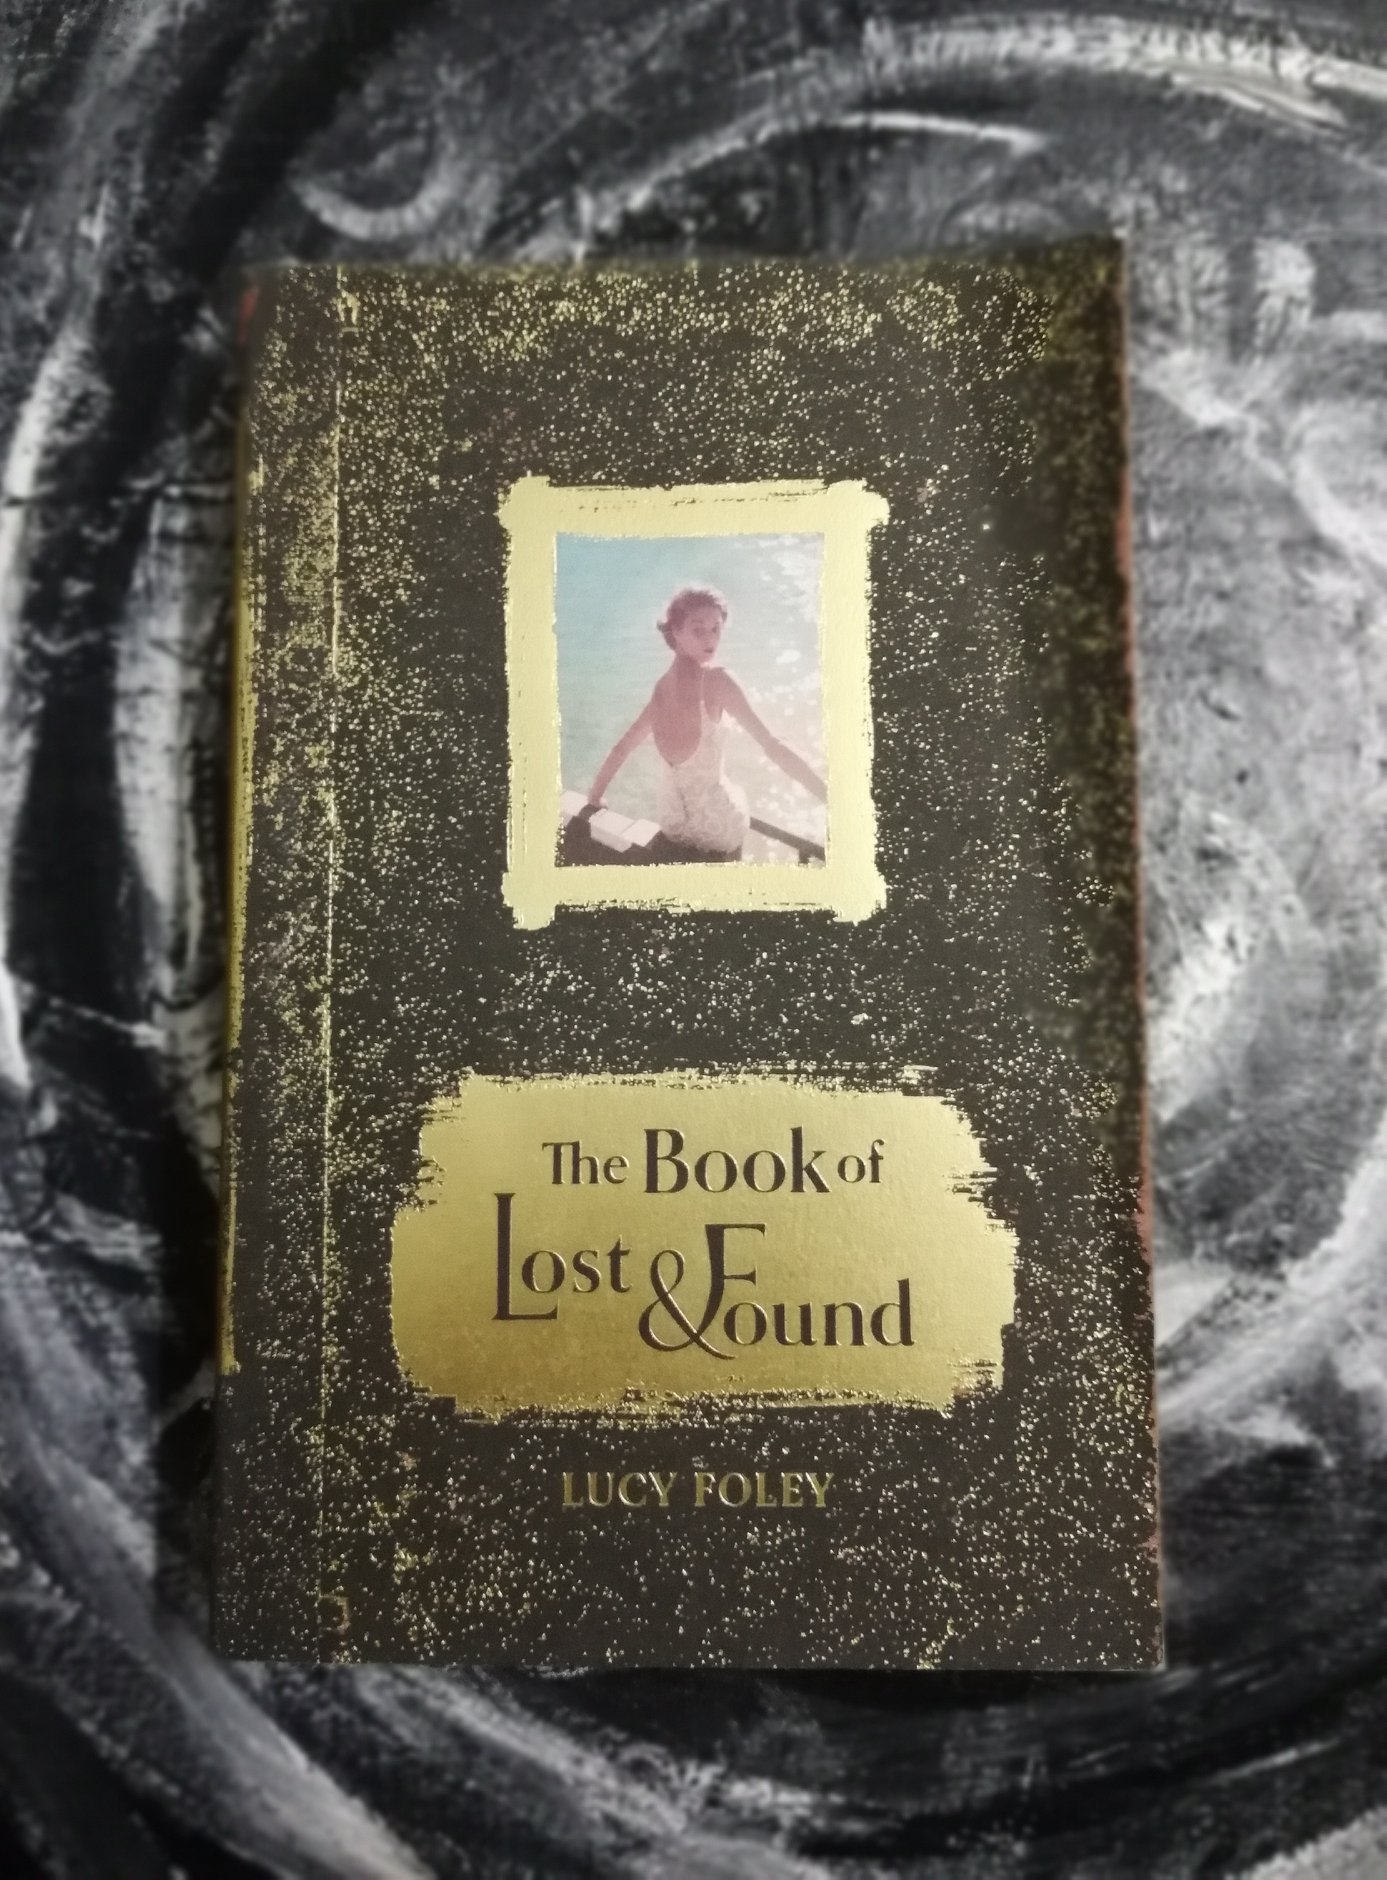 the book of lost and found